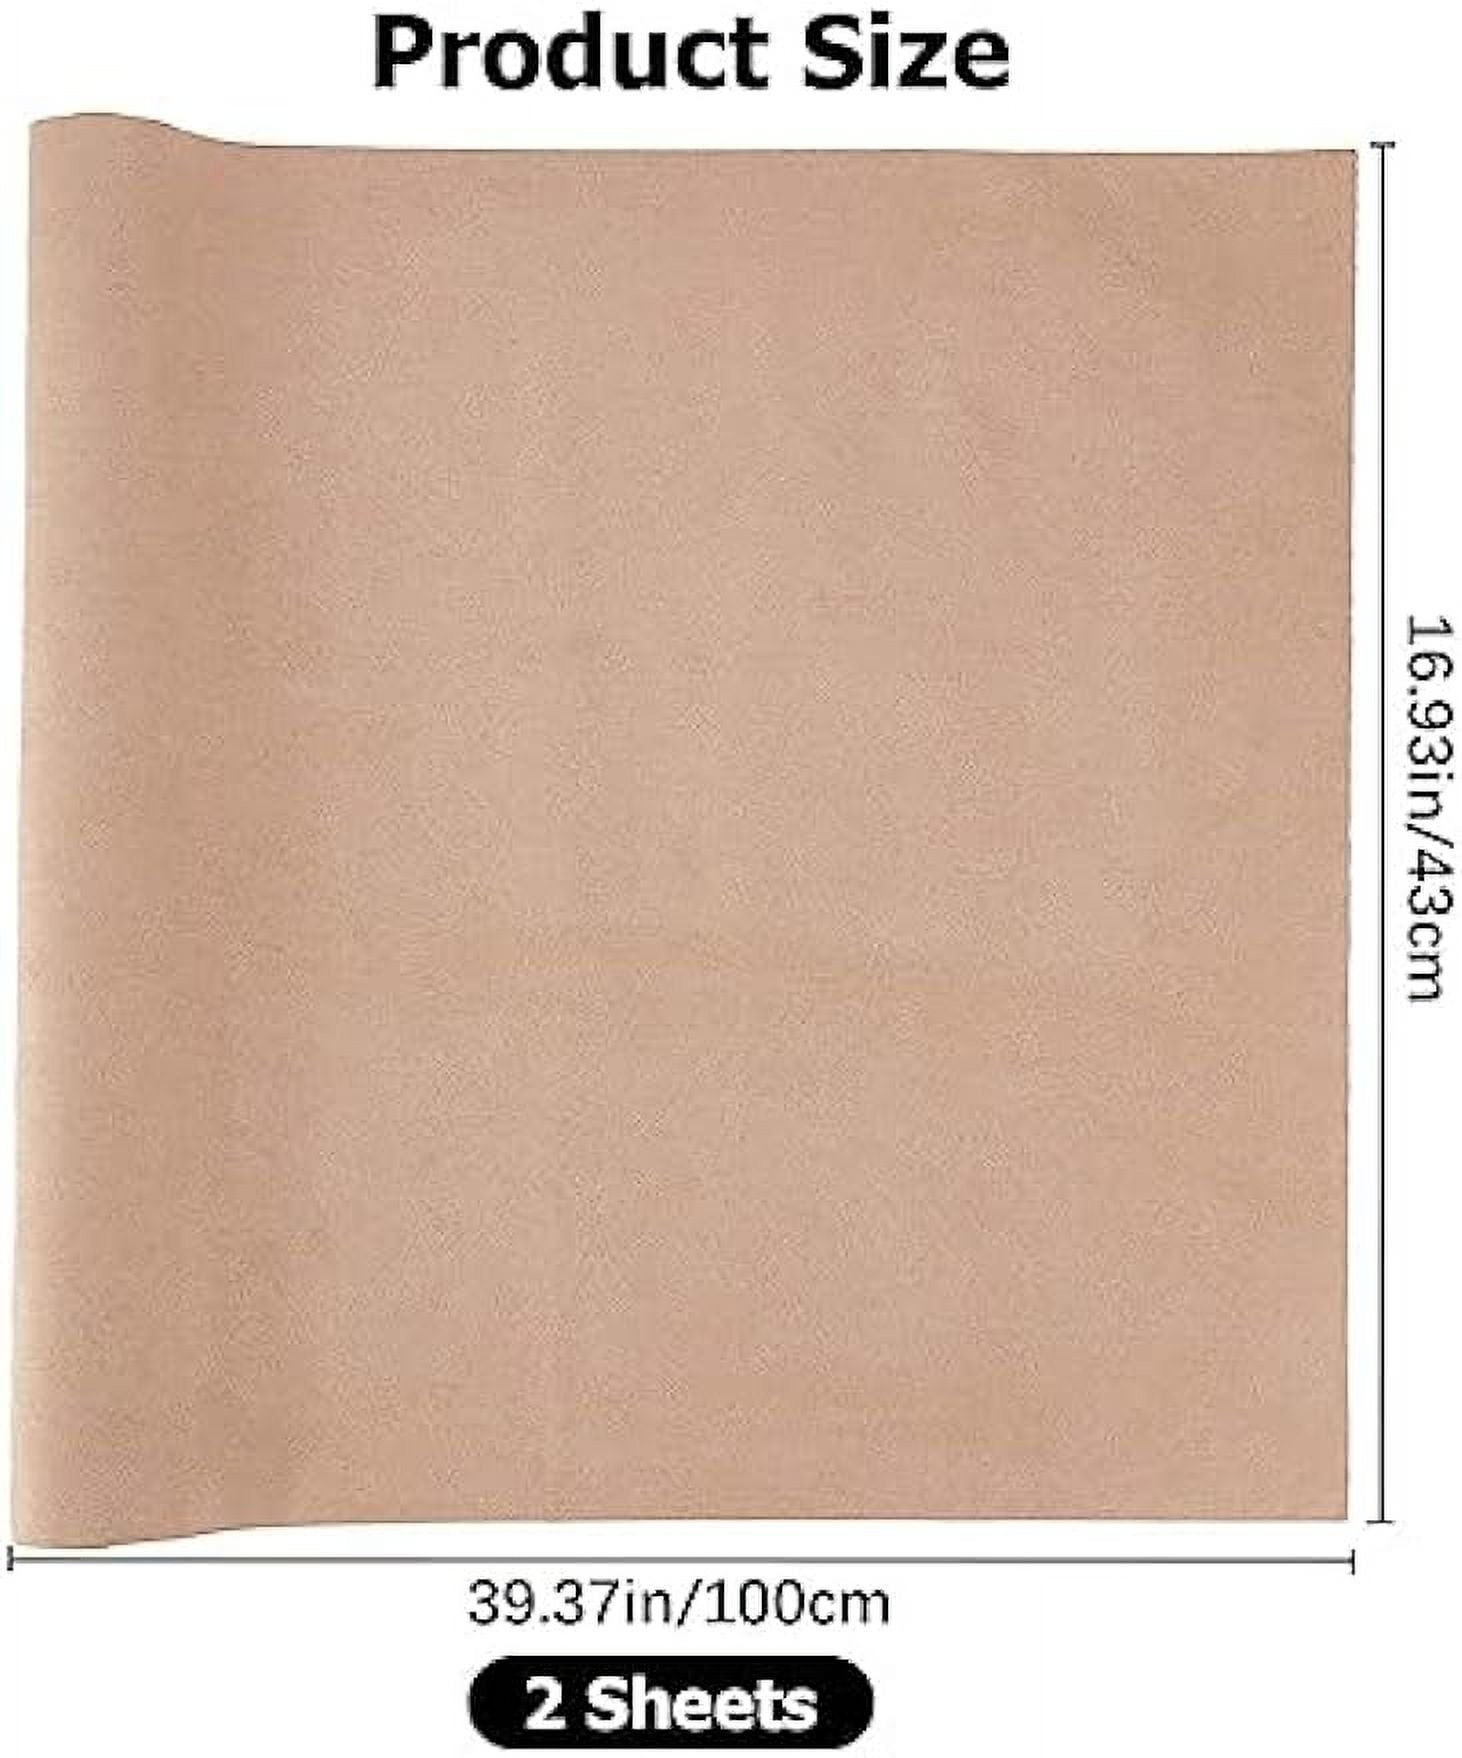 WOOQU CGR62021 Wooqu Book Cloth, Fabric Surface And Paper Backed, Durable,  Strong, 17X29A, For Book Binding, Olive